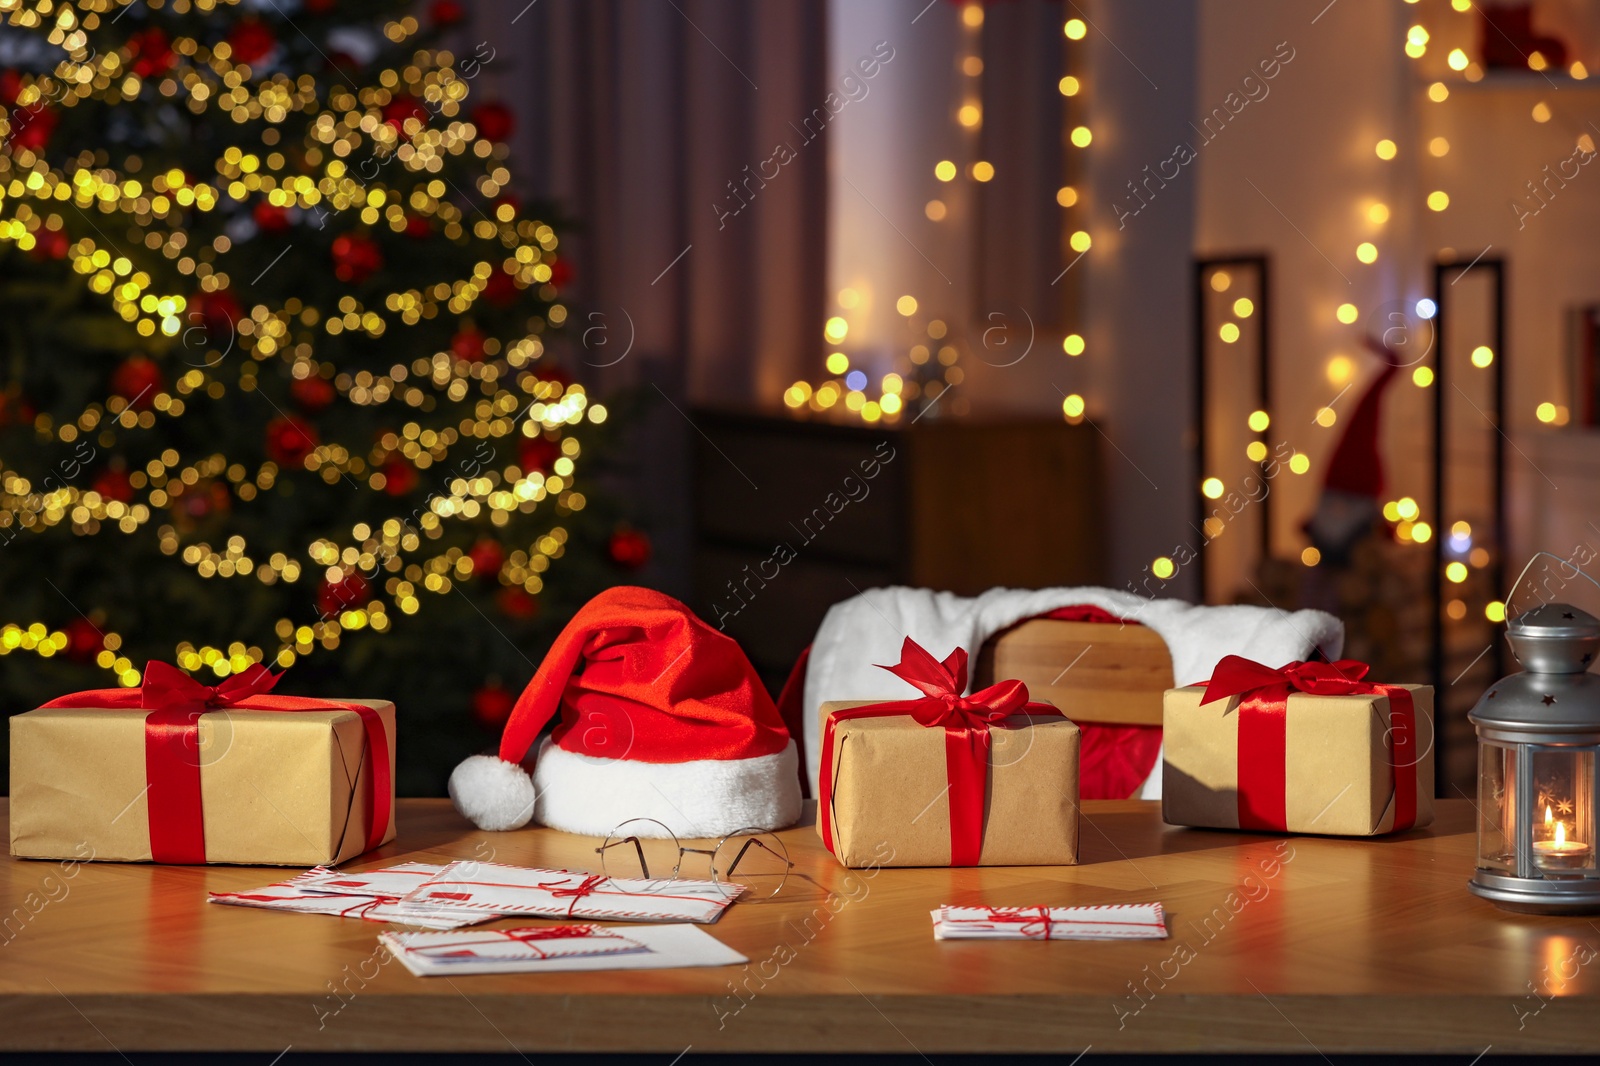 Photo of Santa's Claus workplace. Gift boxes, letters, lantern on table and costume in room with Christmas decor